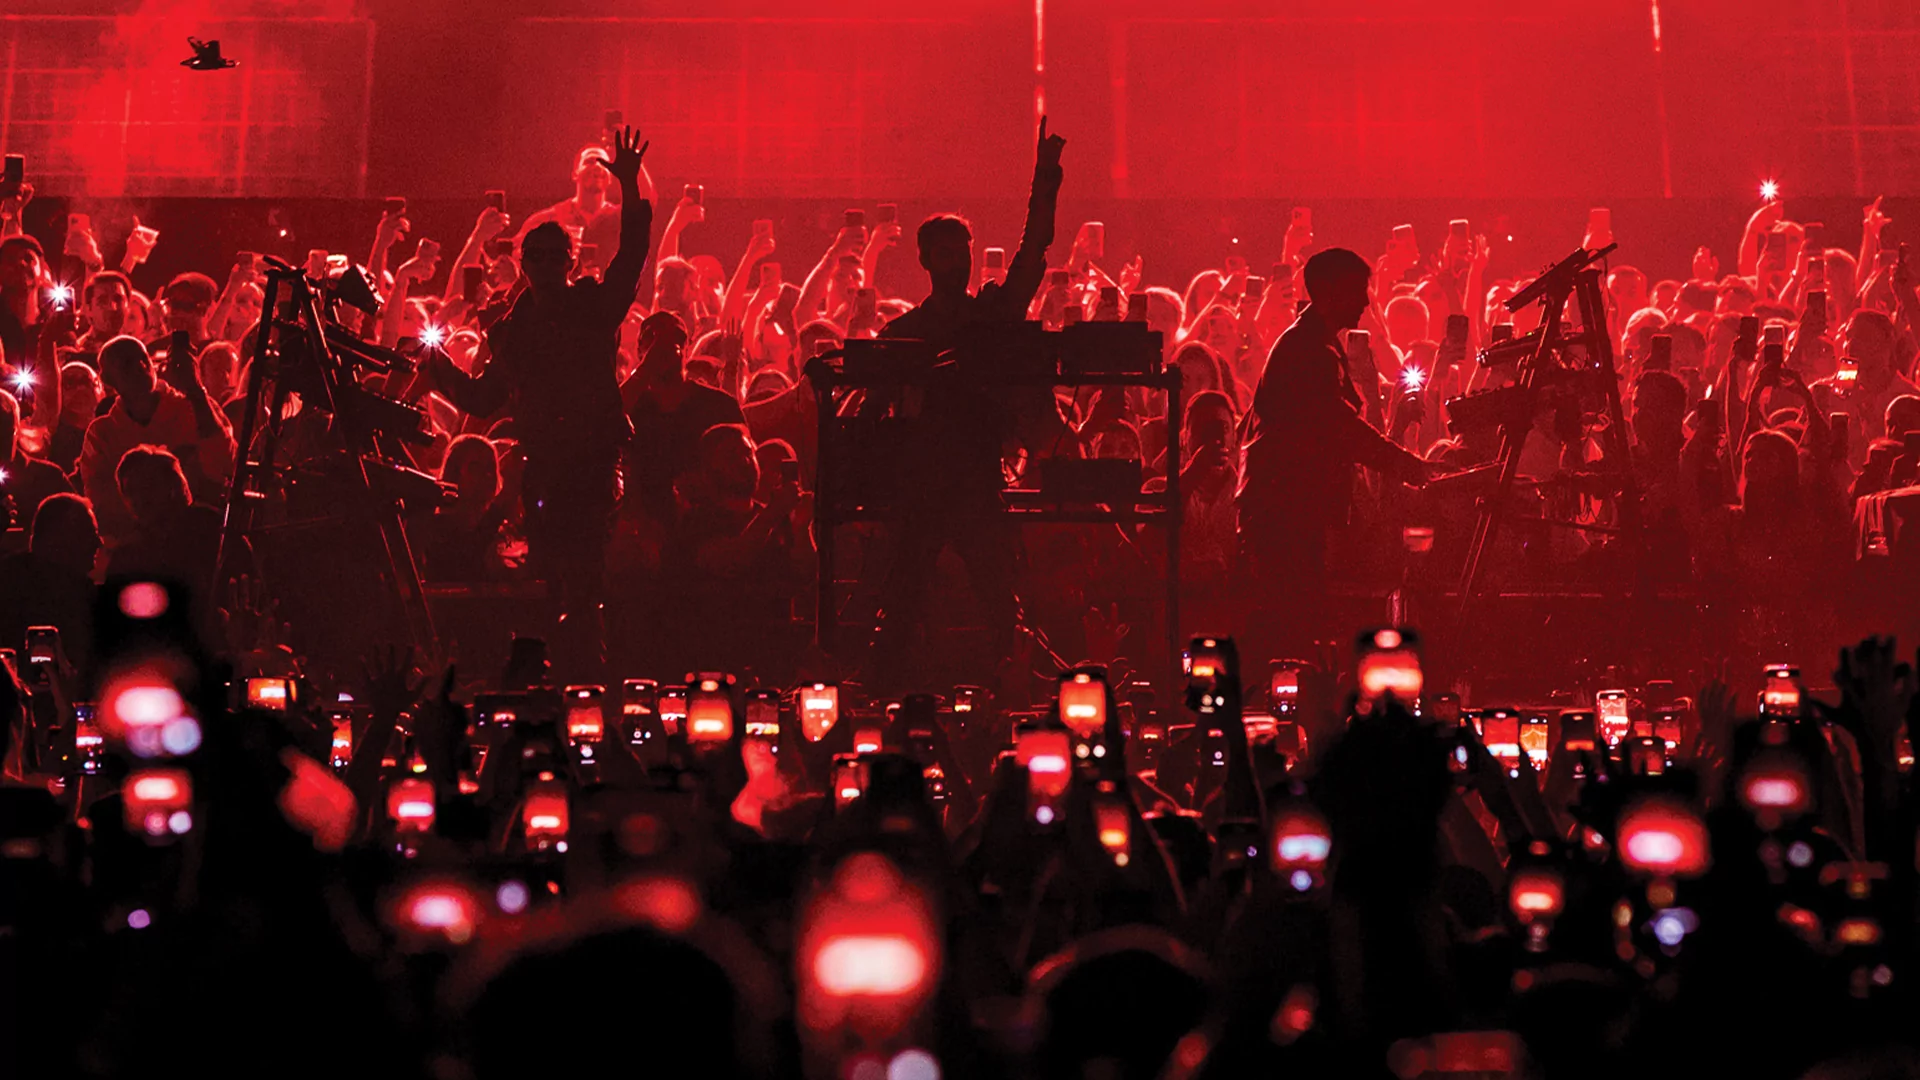 Photo of Meduza playing together in front of a big crowd under red lights